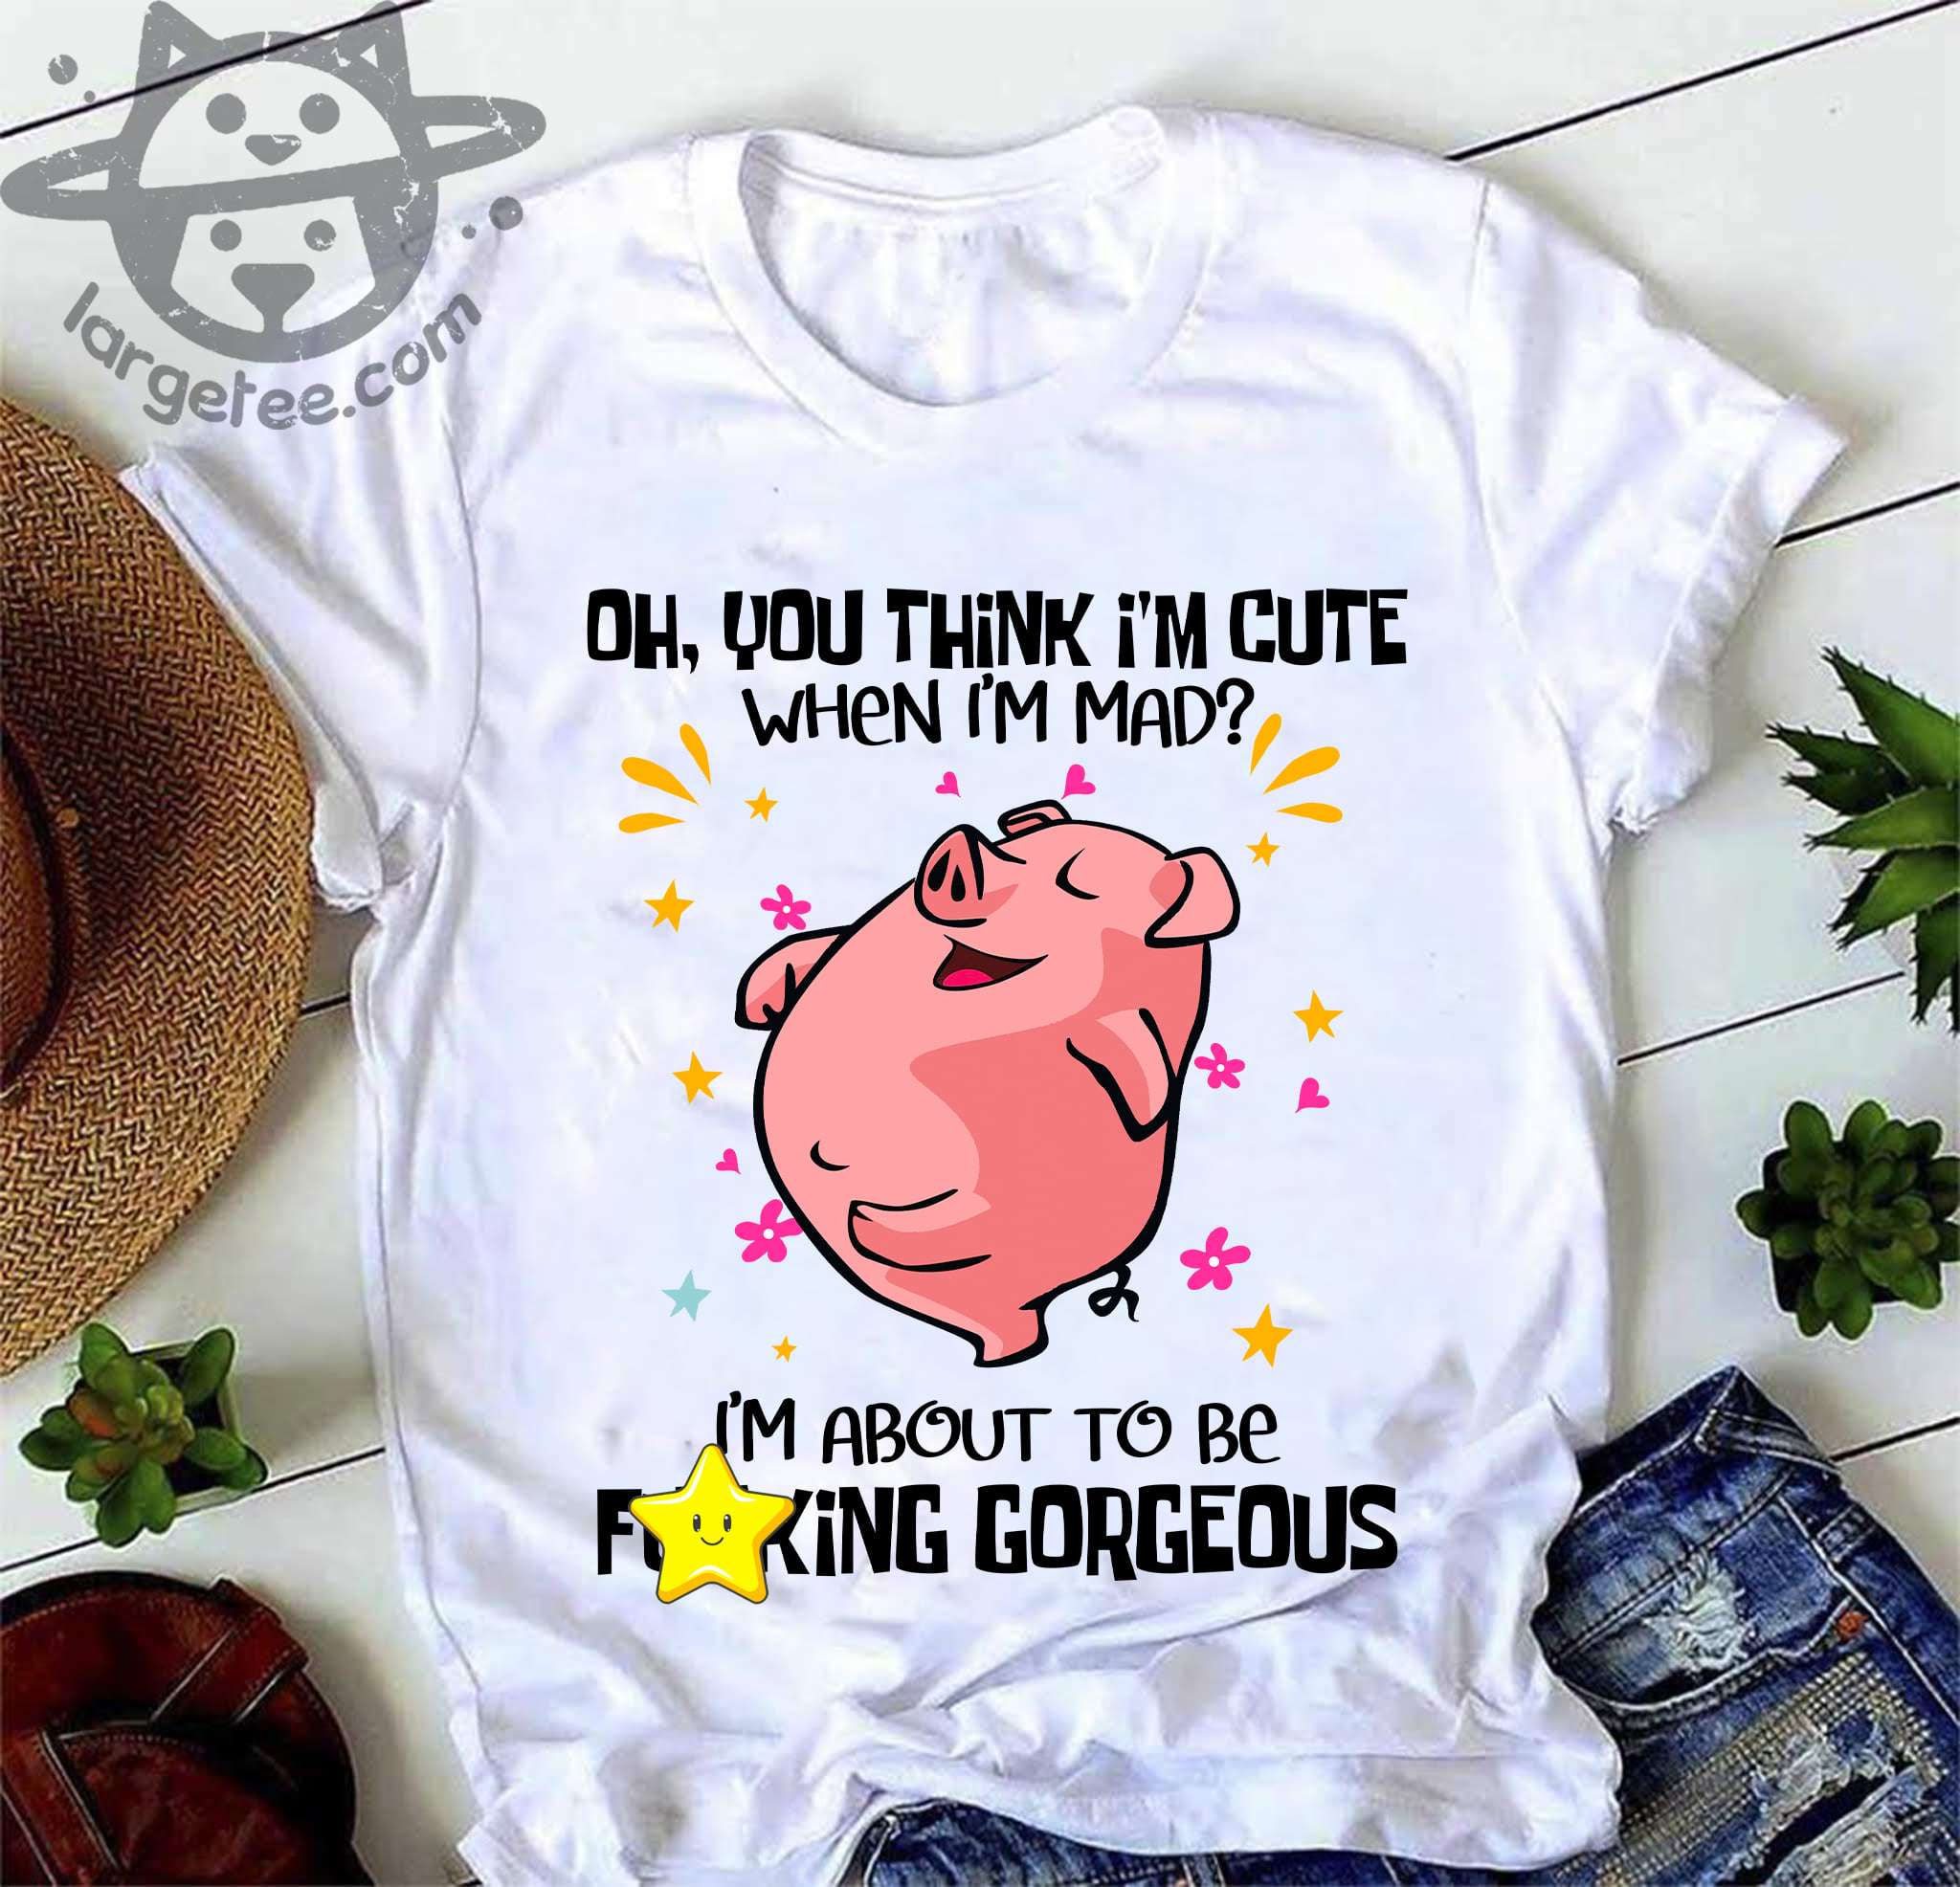 Funny Pig - Oh you think i'm cute when i'm mad i'm about to be fucking gorgeous